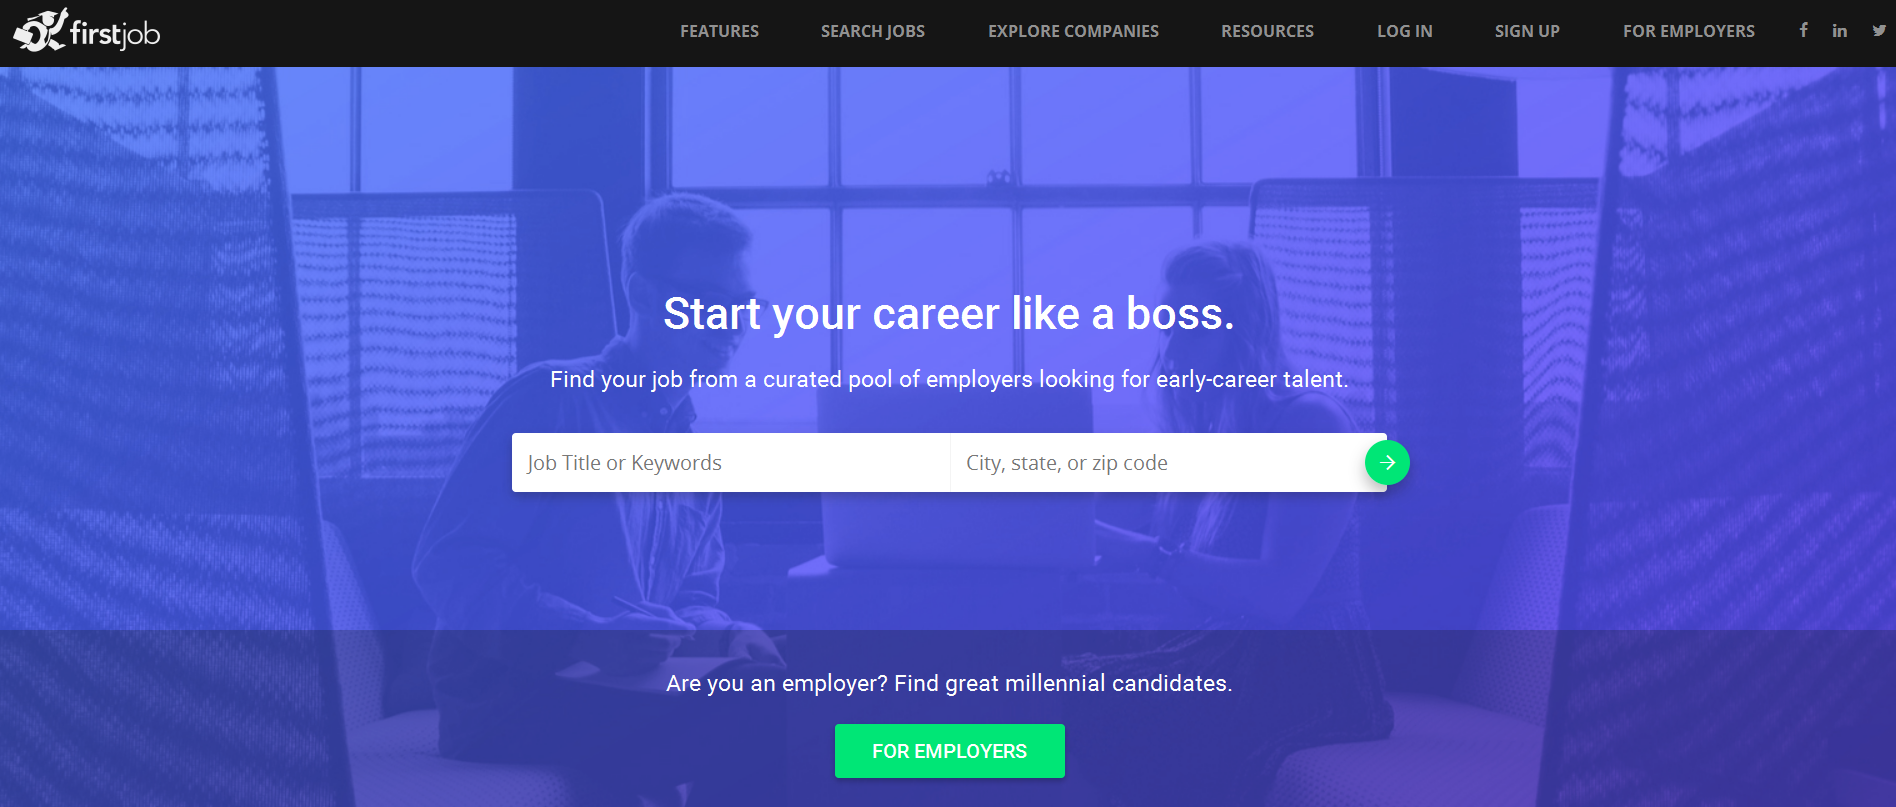 FirstJob is a startup helping to find a job